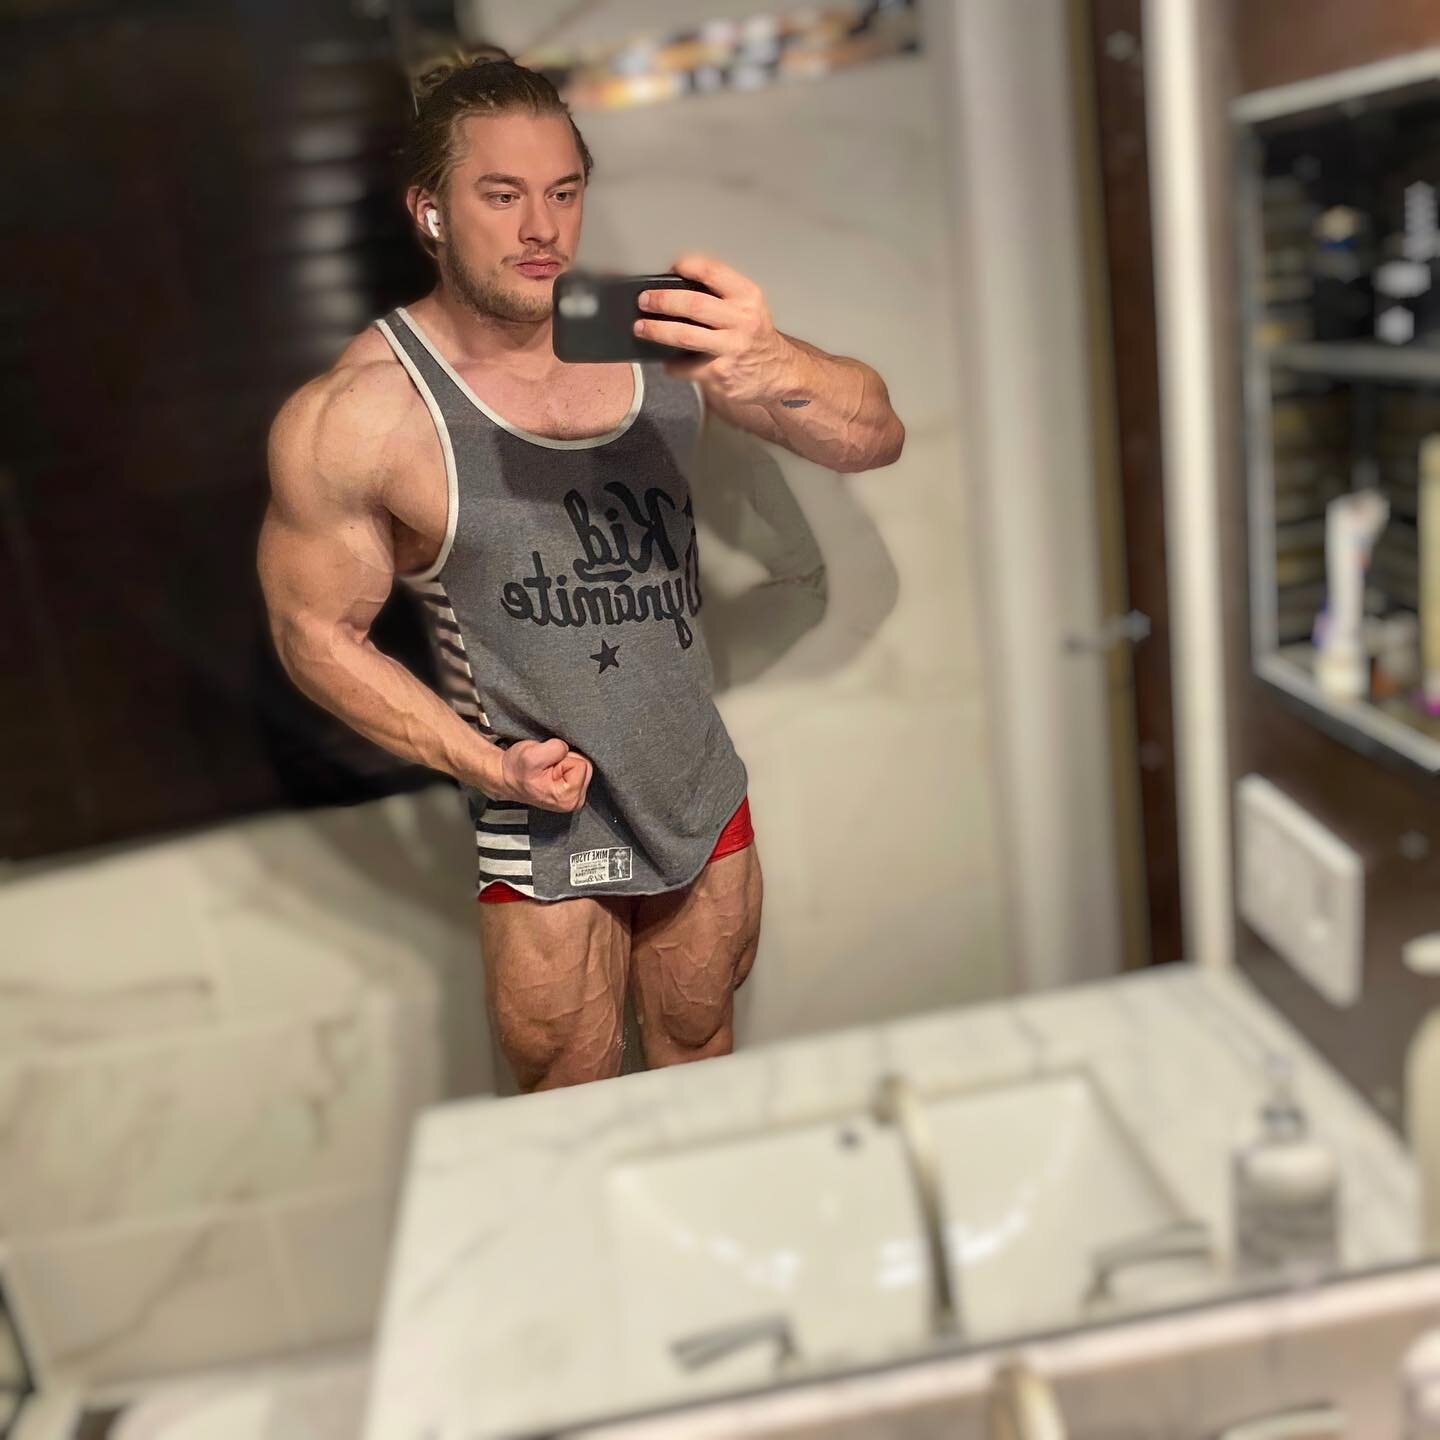 Good Lighting ✅ ⁣
Flattering Angle ✅ ⁣
Filter ✅ ⁣
Top covers pp ✅ ⁣
Flex Hard without making face 𝘴𝘦𝘮𝘪-✅ ⁣
⁣
⁣
#bodybuilding #fitness #fitspo #physique #grapefruit⁣
⁣
Hashtags ✅